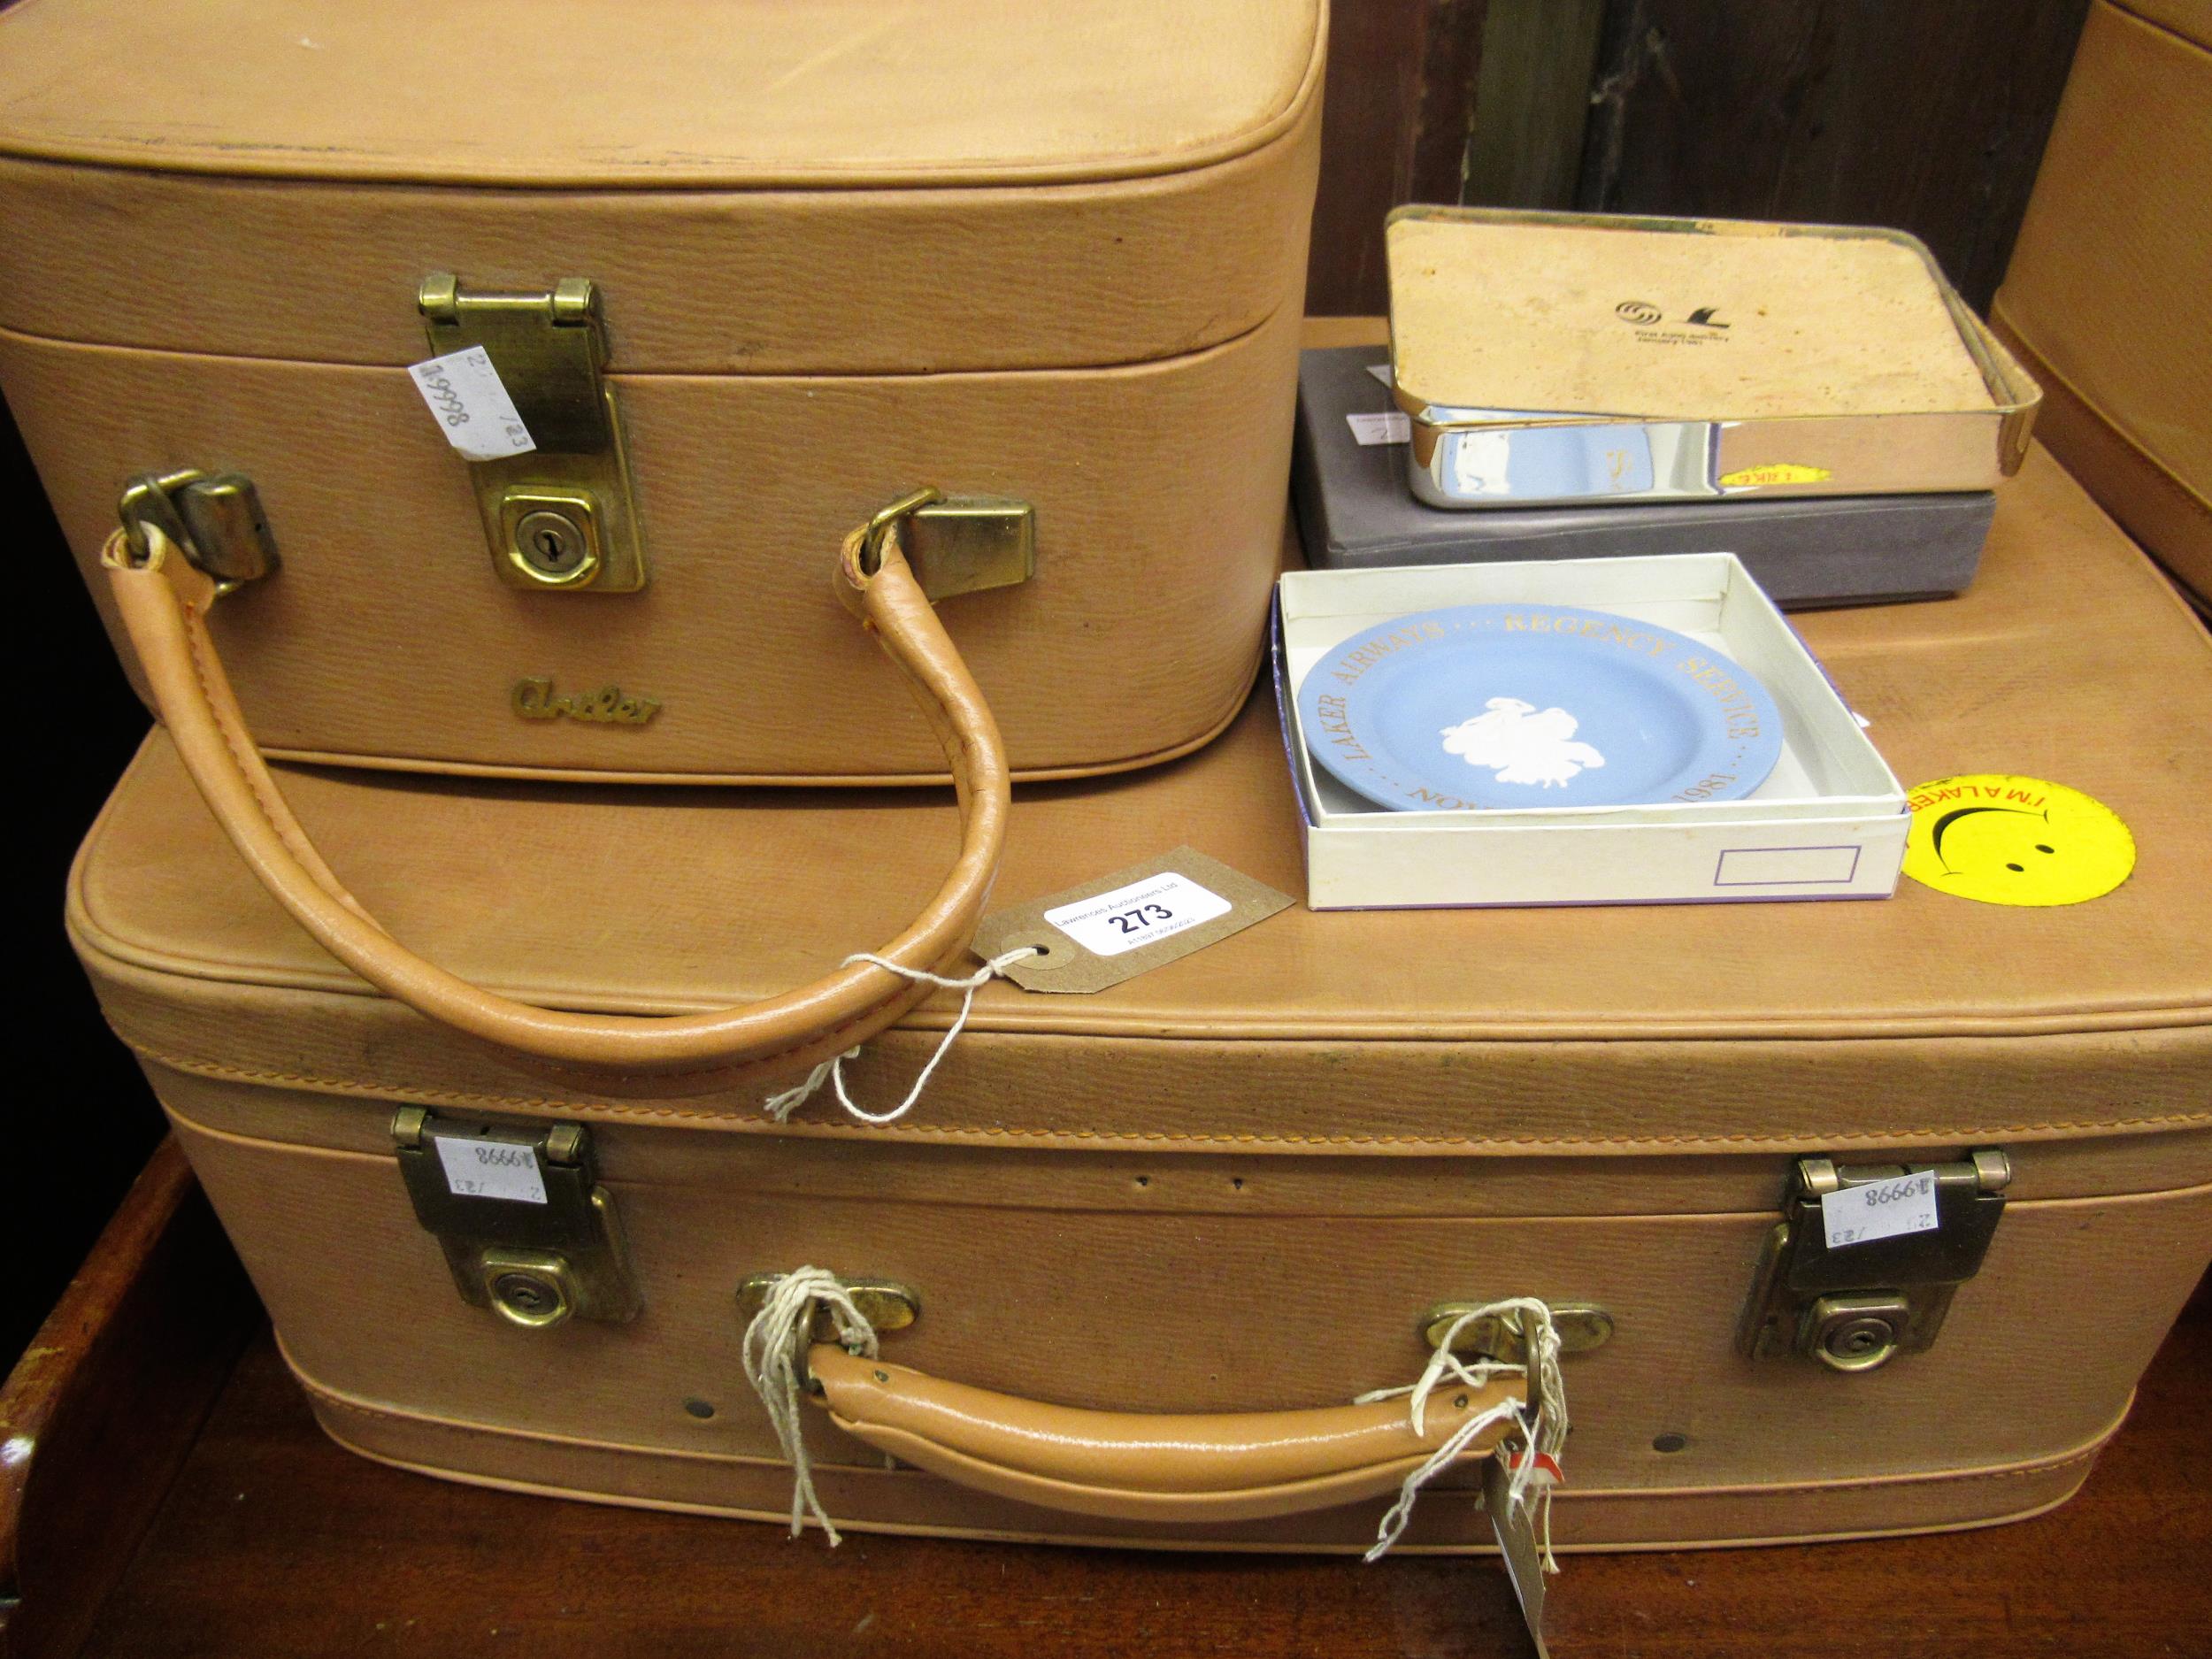 Set of four Antler suitcases by direct descent from Freddie Laker, together with a presentation box,